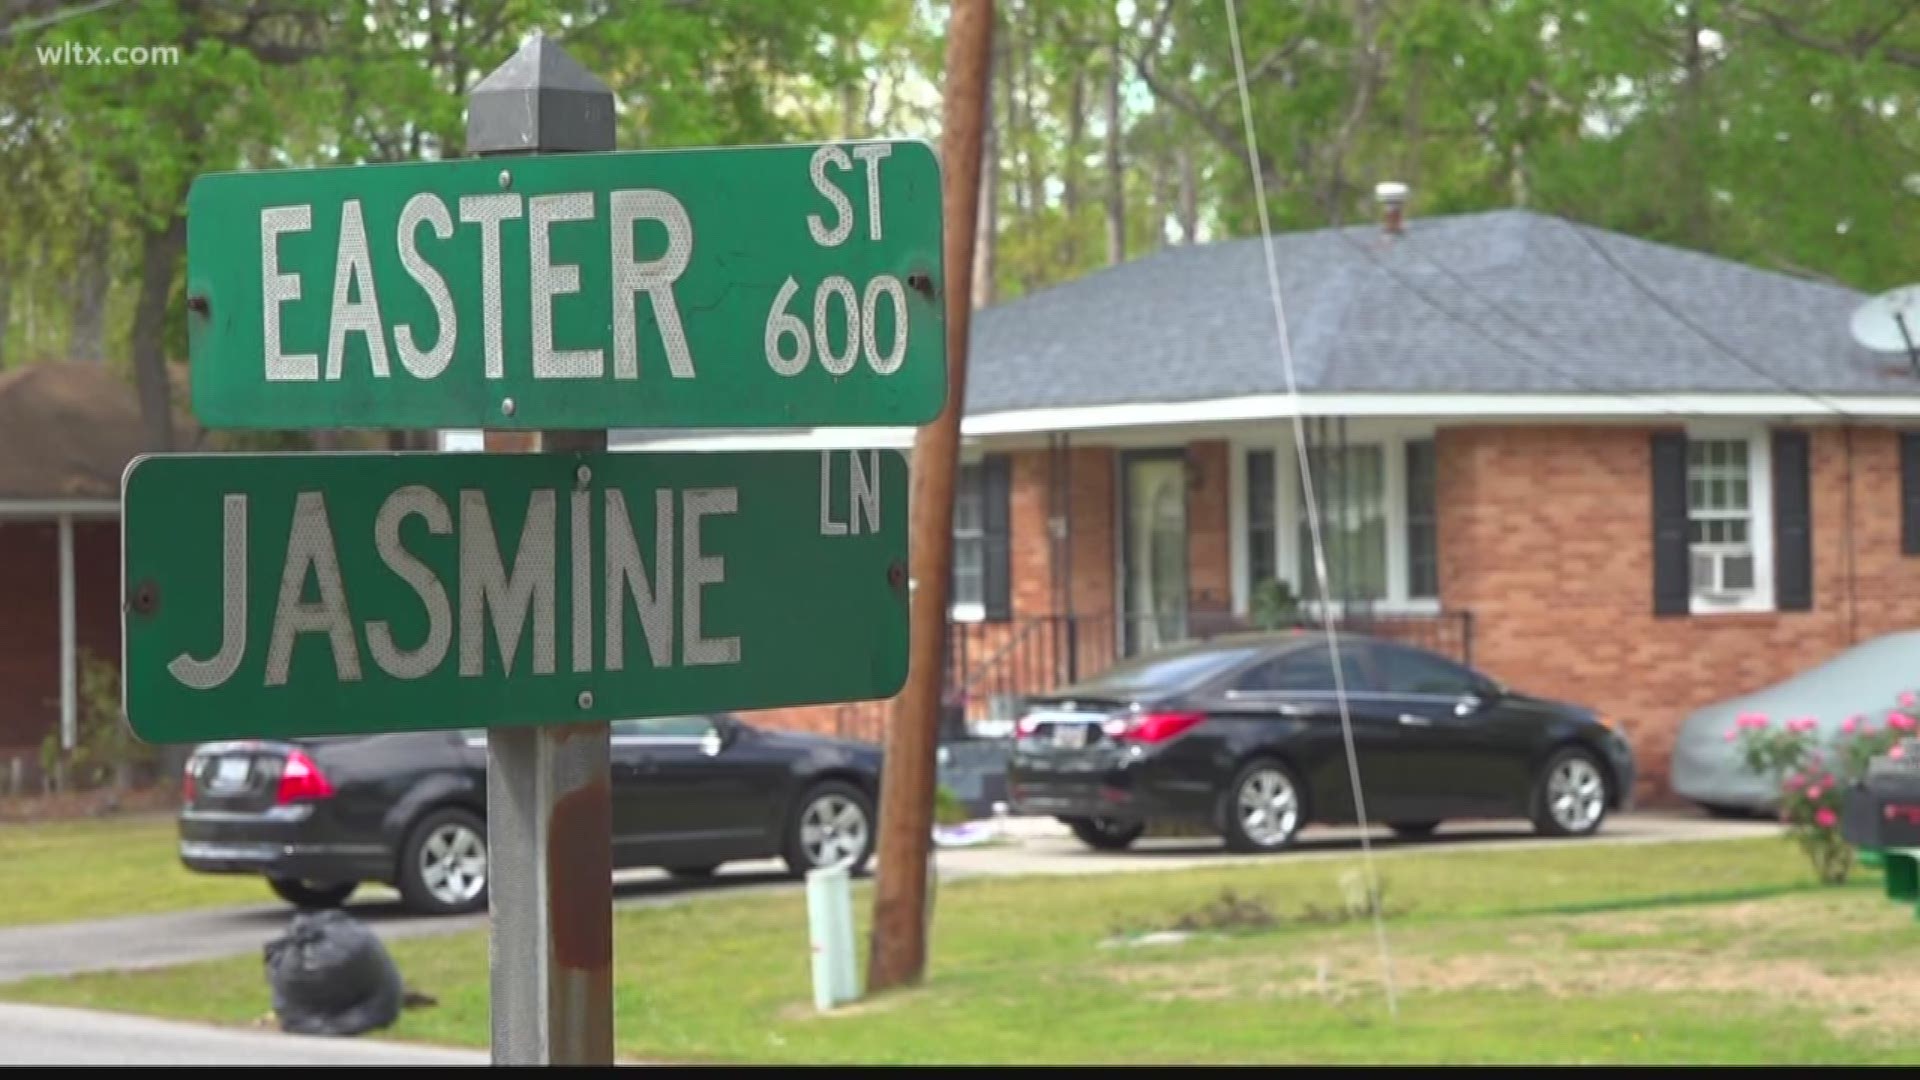 Those who live on Easter Street remain extra vigilant following a shooting.  News19's Nic Jones reports.